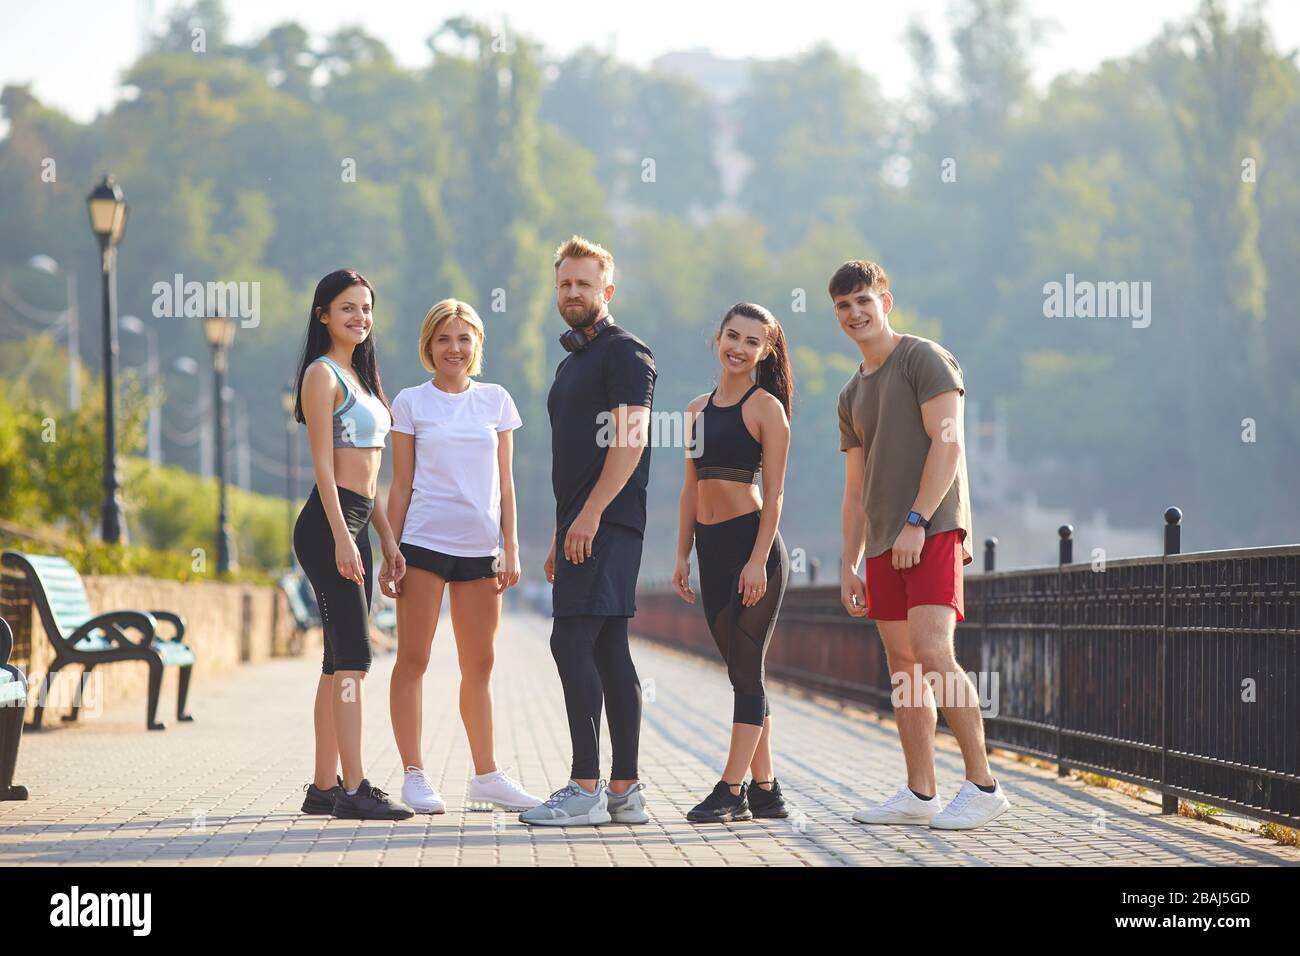 A group of athletes training in the park. Stock Photo